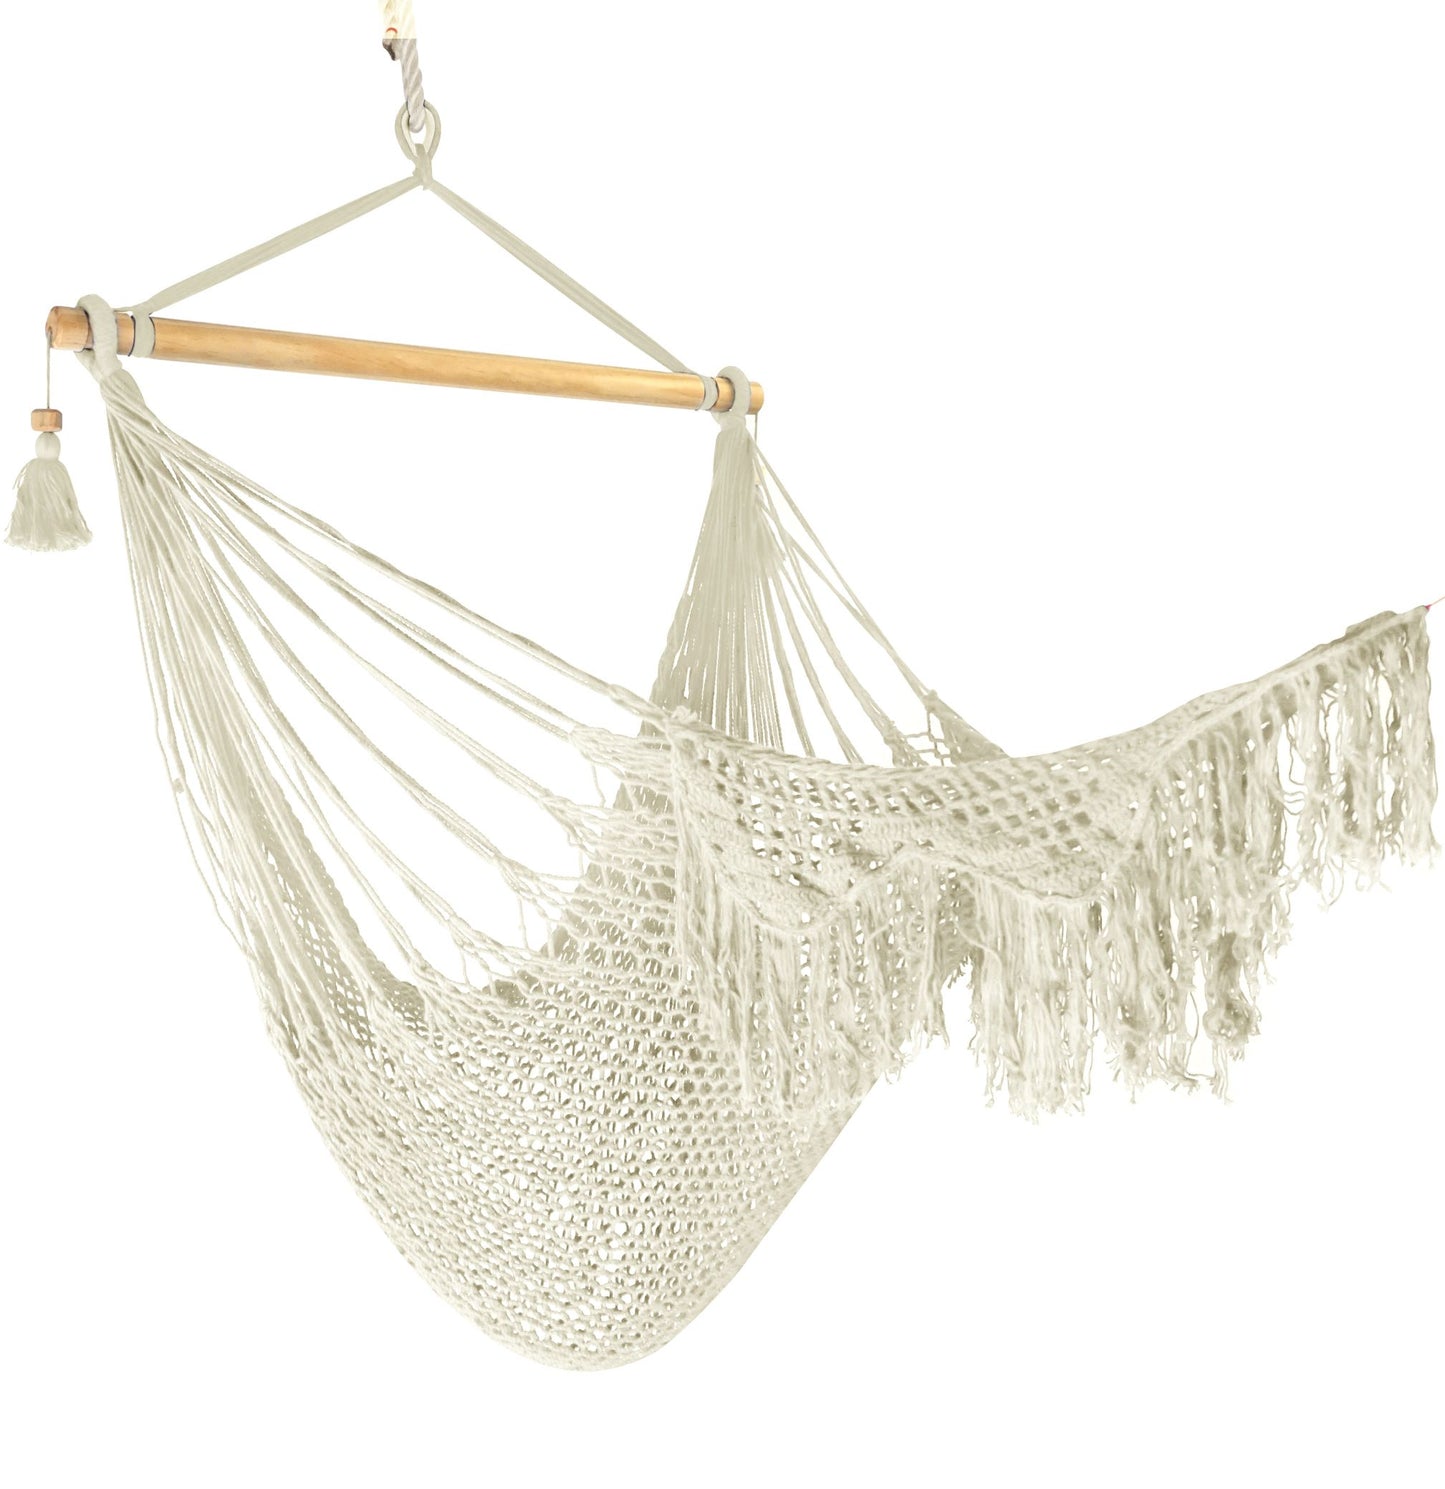 Off White Woven Hanging Chair for Indoor